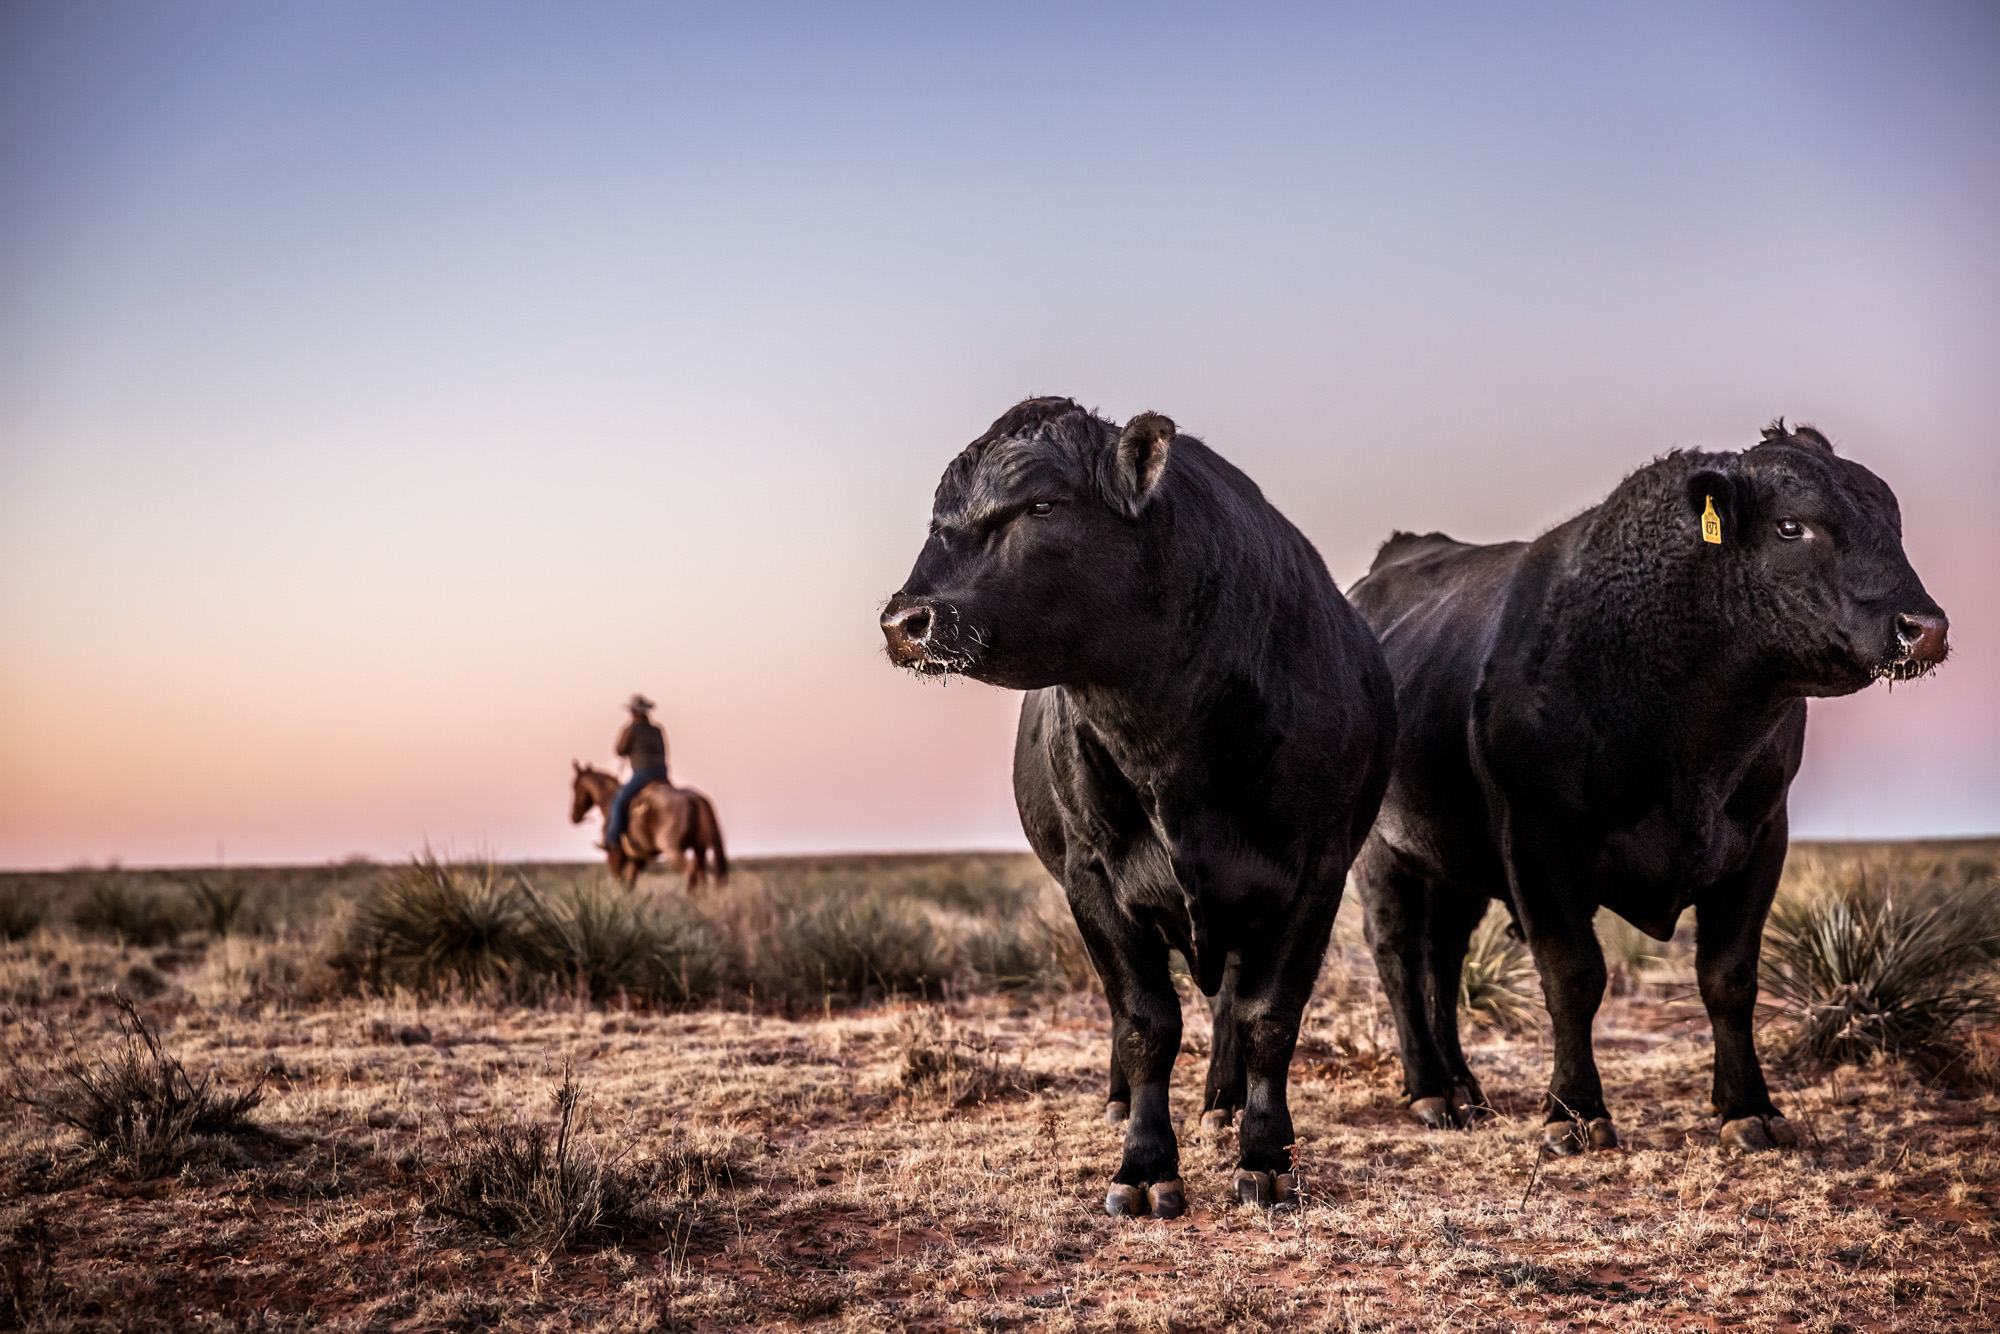 2 black angus cattle standing in field in new mexico with cowboy riding on horseback in background at sunrise sunset